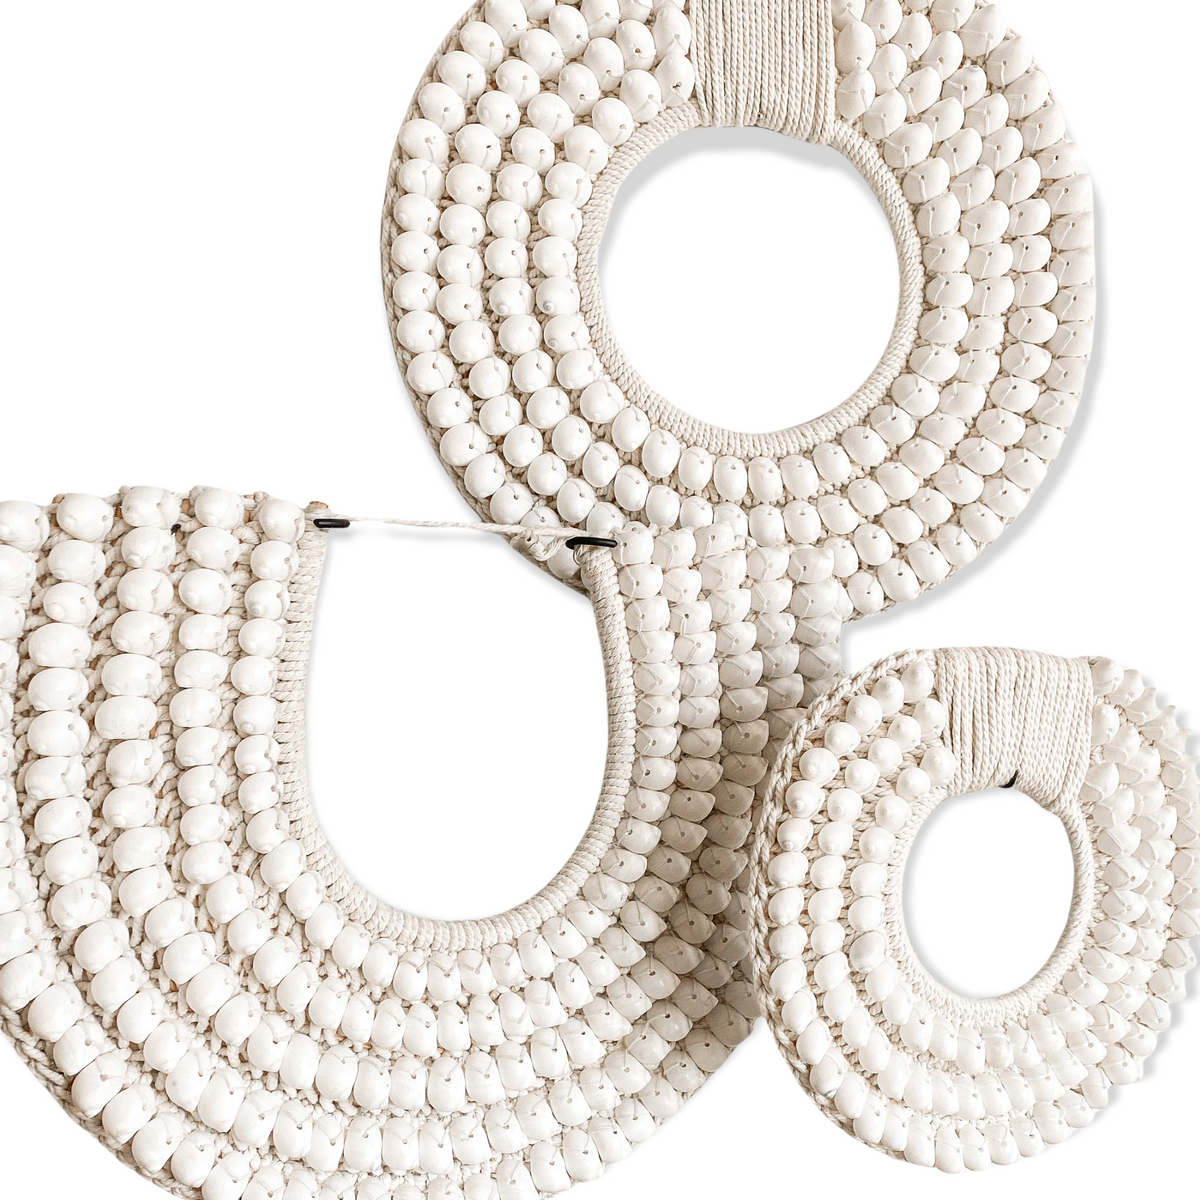 Smooth white shells, intricately sewn by hand onto a thick crochet backing. These authentic papua tribal shell necklaces are a versatile piece & will inject a coastal vibe into your space. Use as a wall hanging or mix & match sizes and styles to create a custom feature. Purchase with a custom made stand for use as a tabletop decor piece on a side table, vanity, console or shelf.  